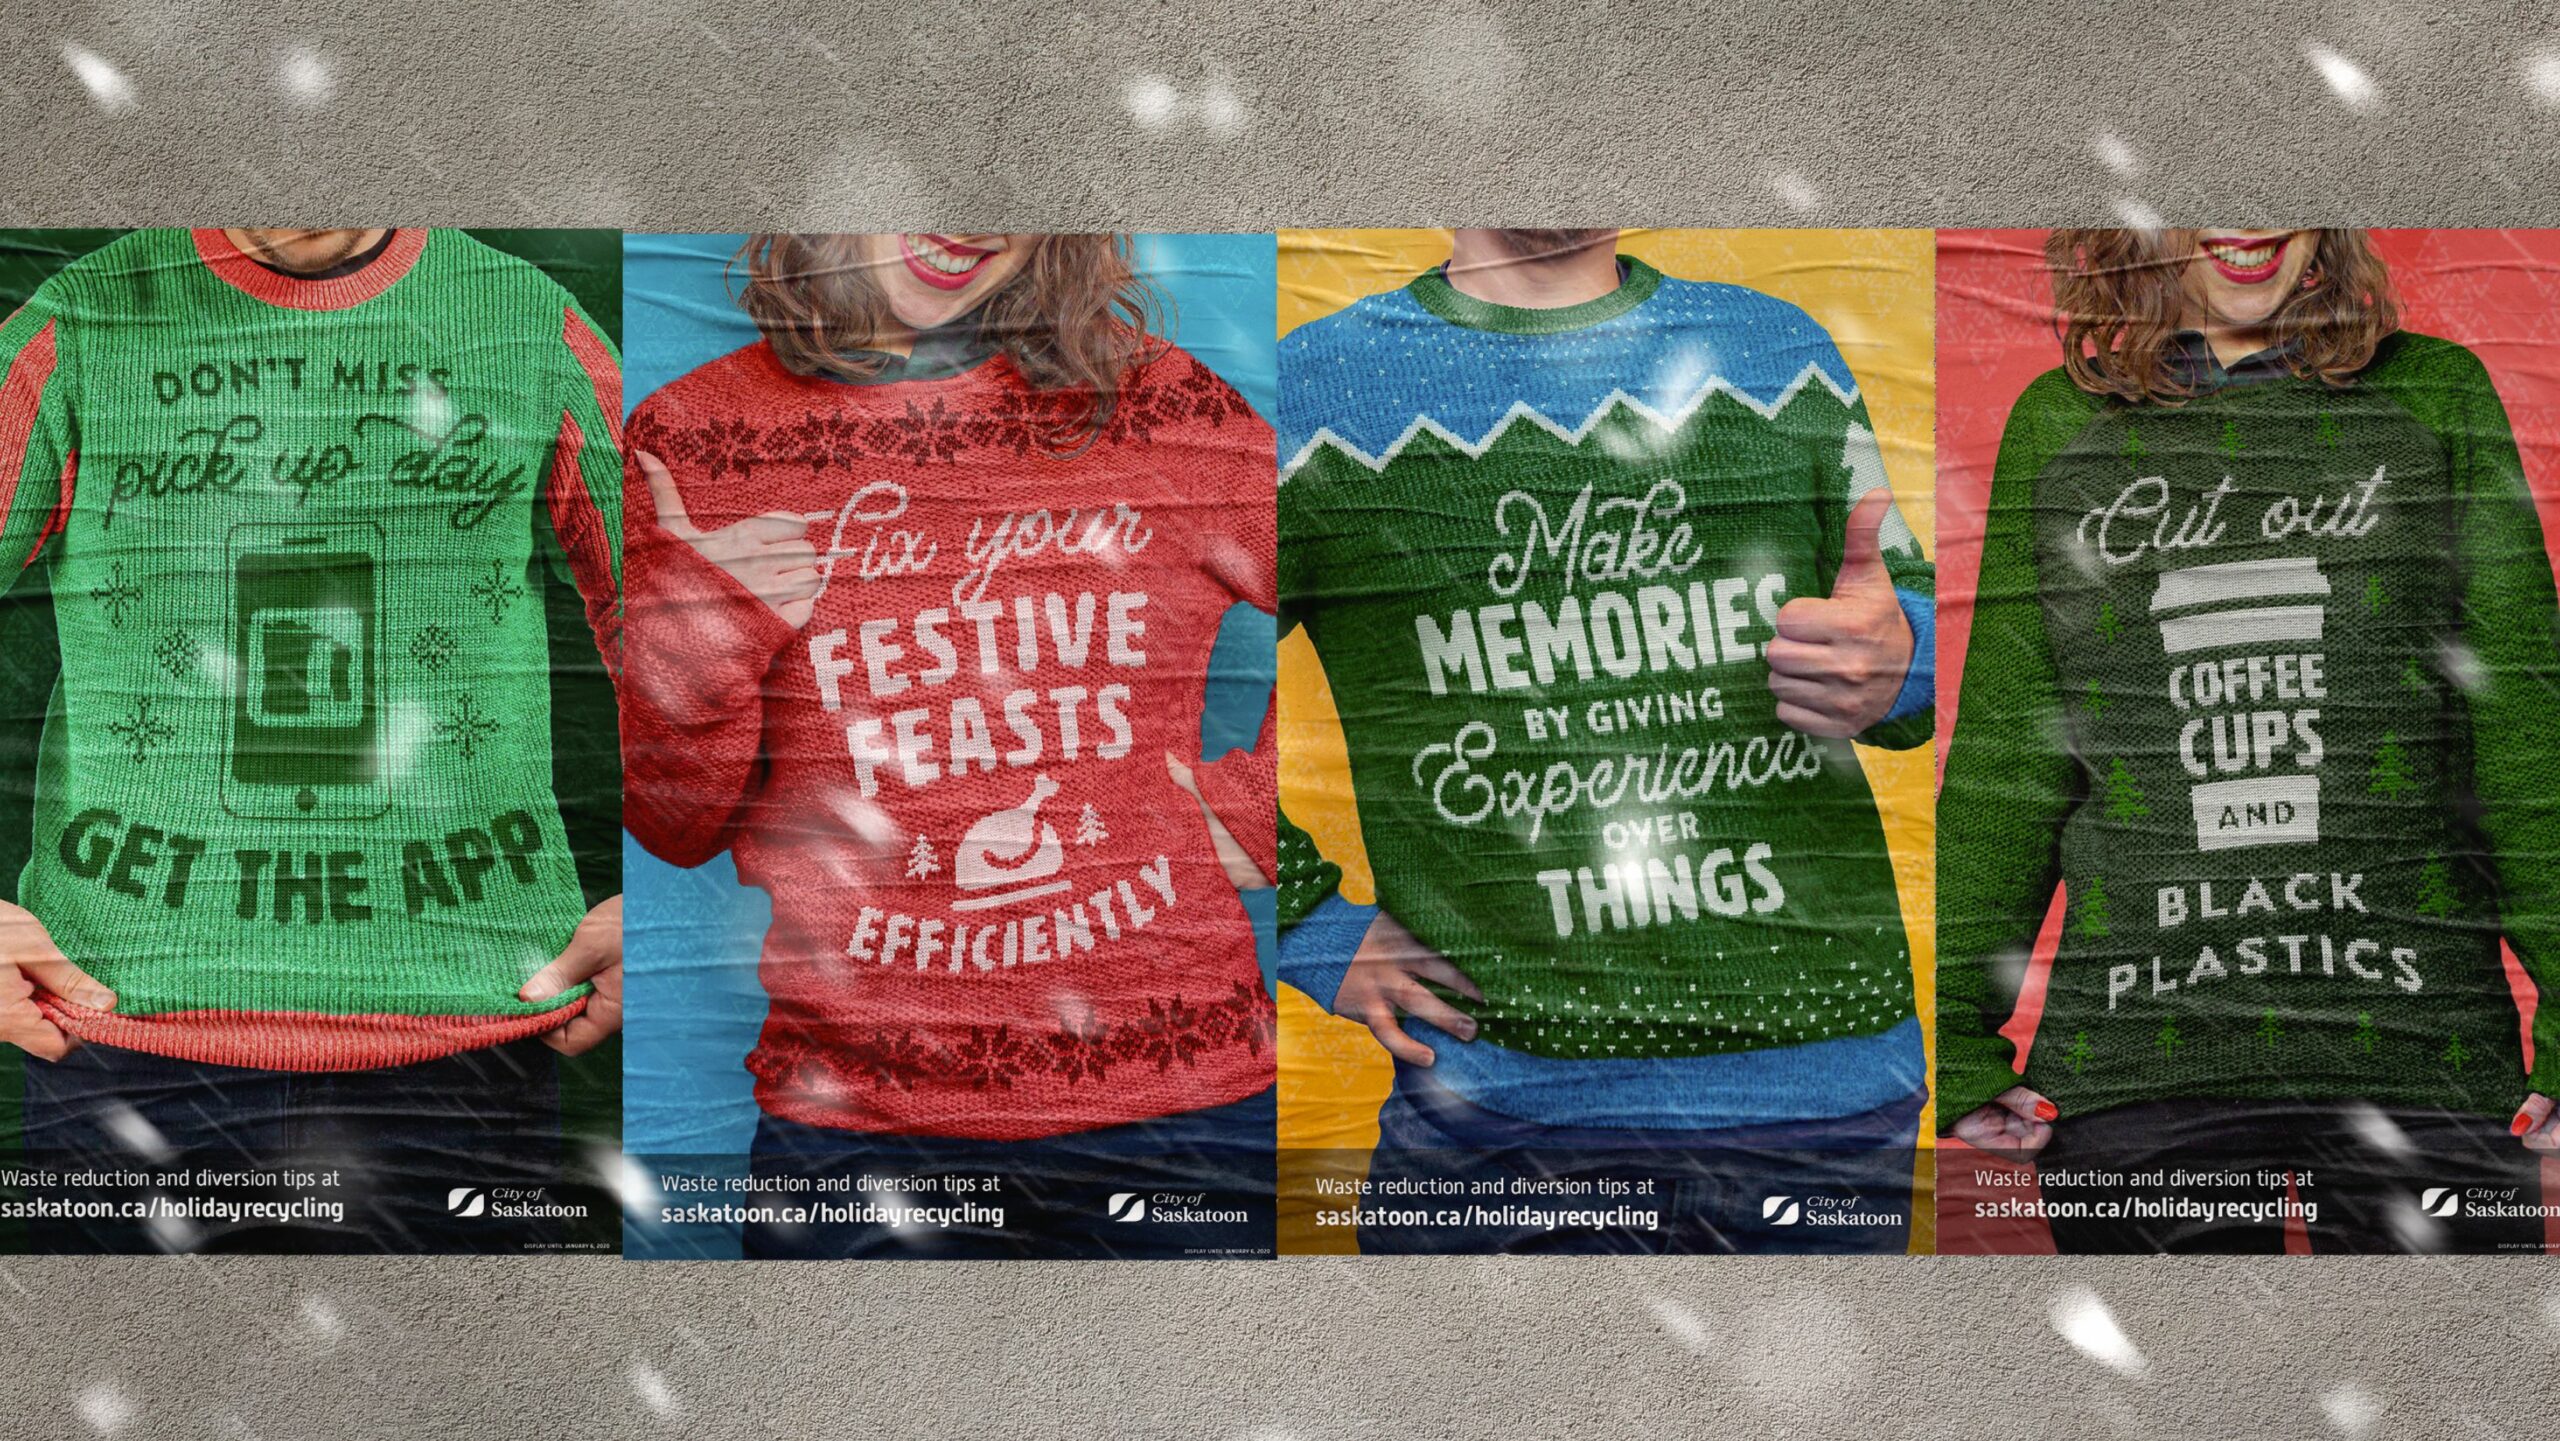 Saskatoon Holiday Recycling Campaign Posters